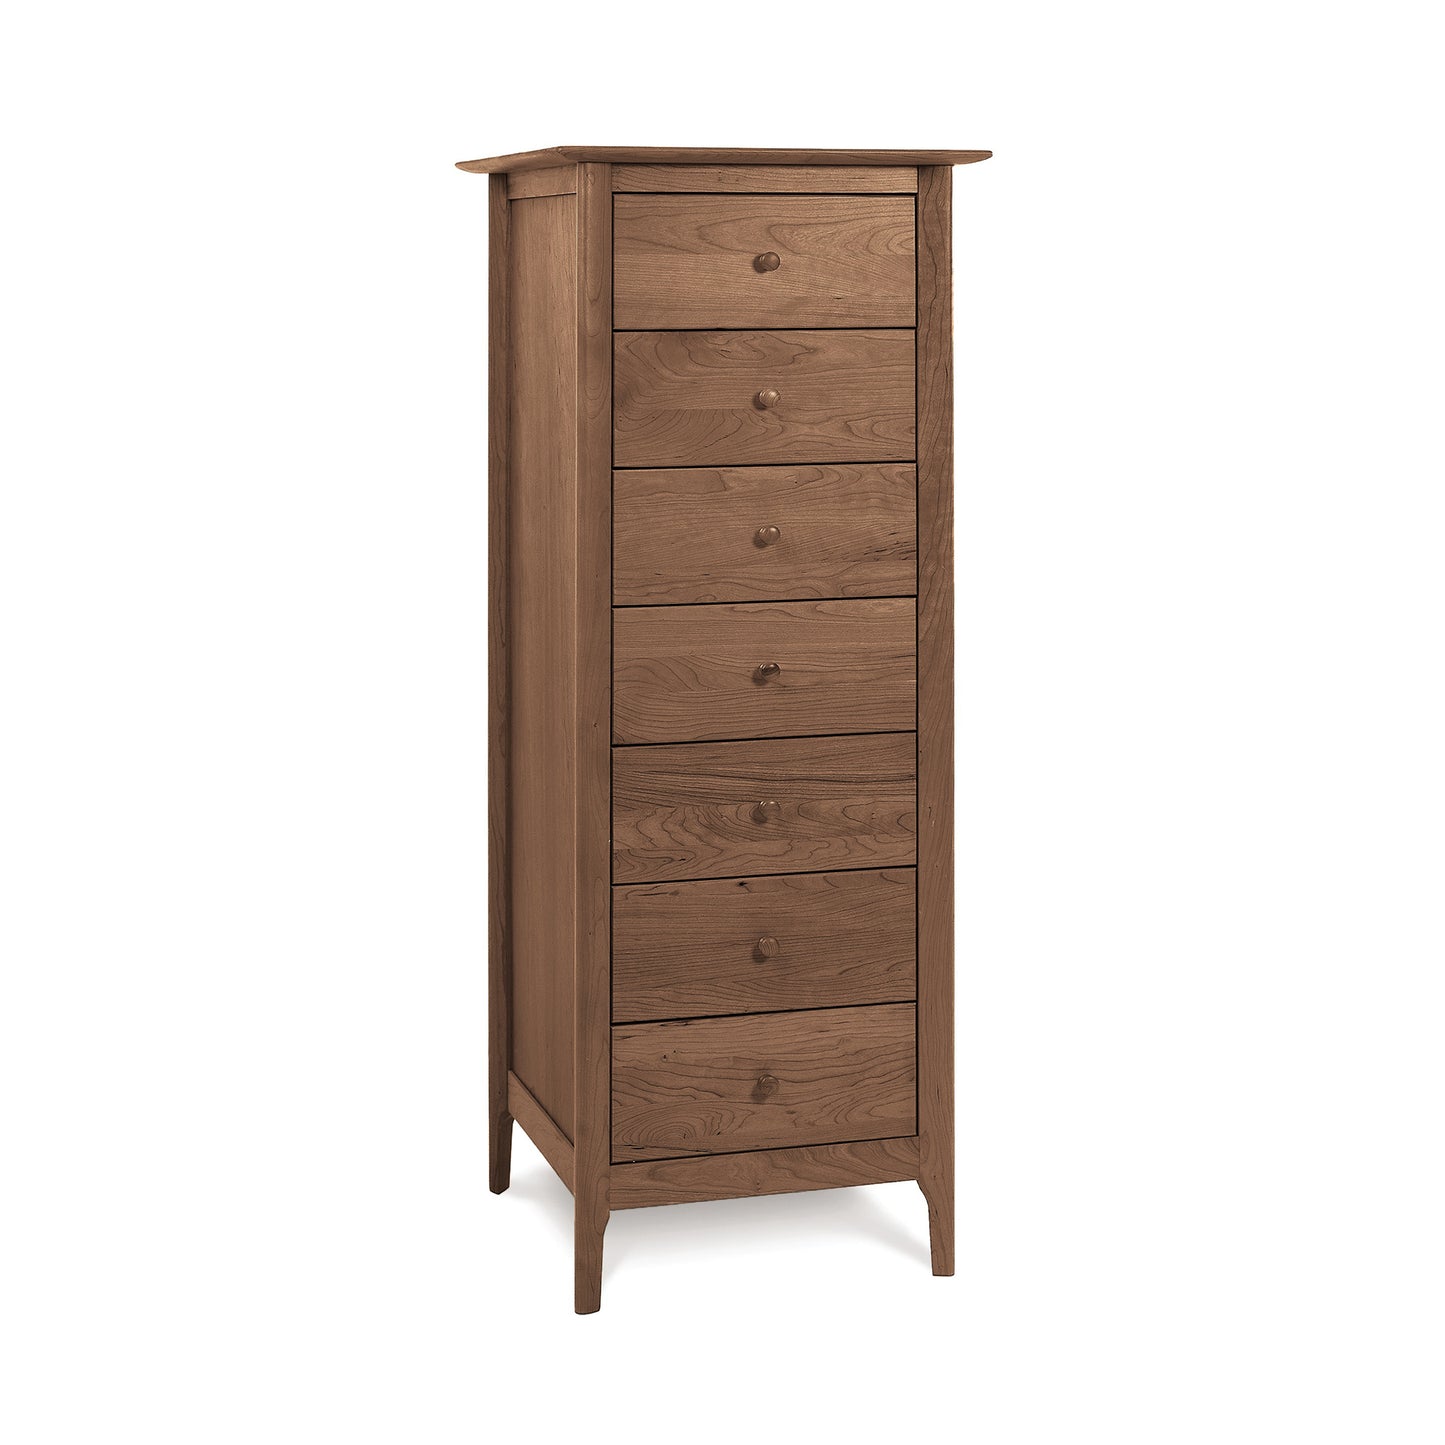 A tall wooden lingerie chest with seven drawers, isolated on a white background, crafted from natural cherry wood.